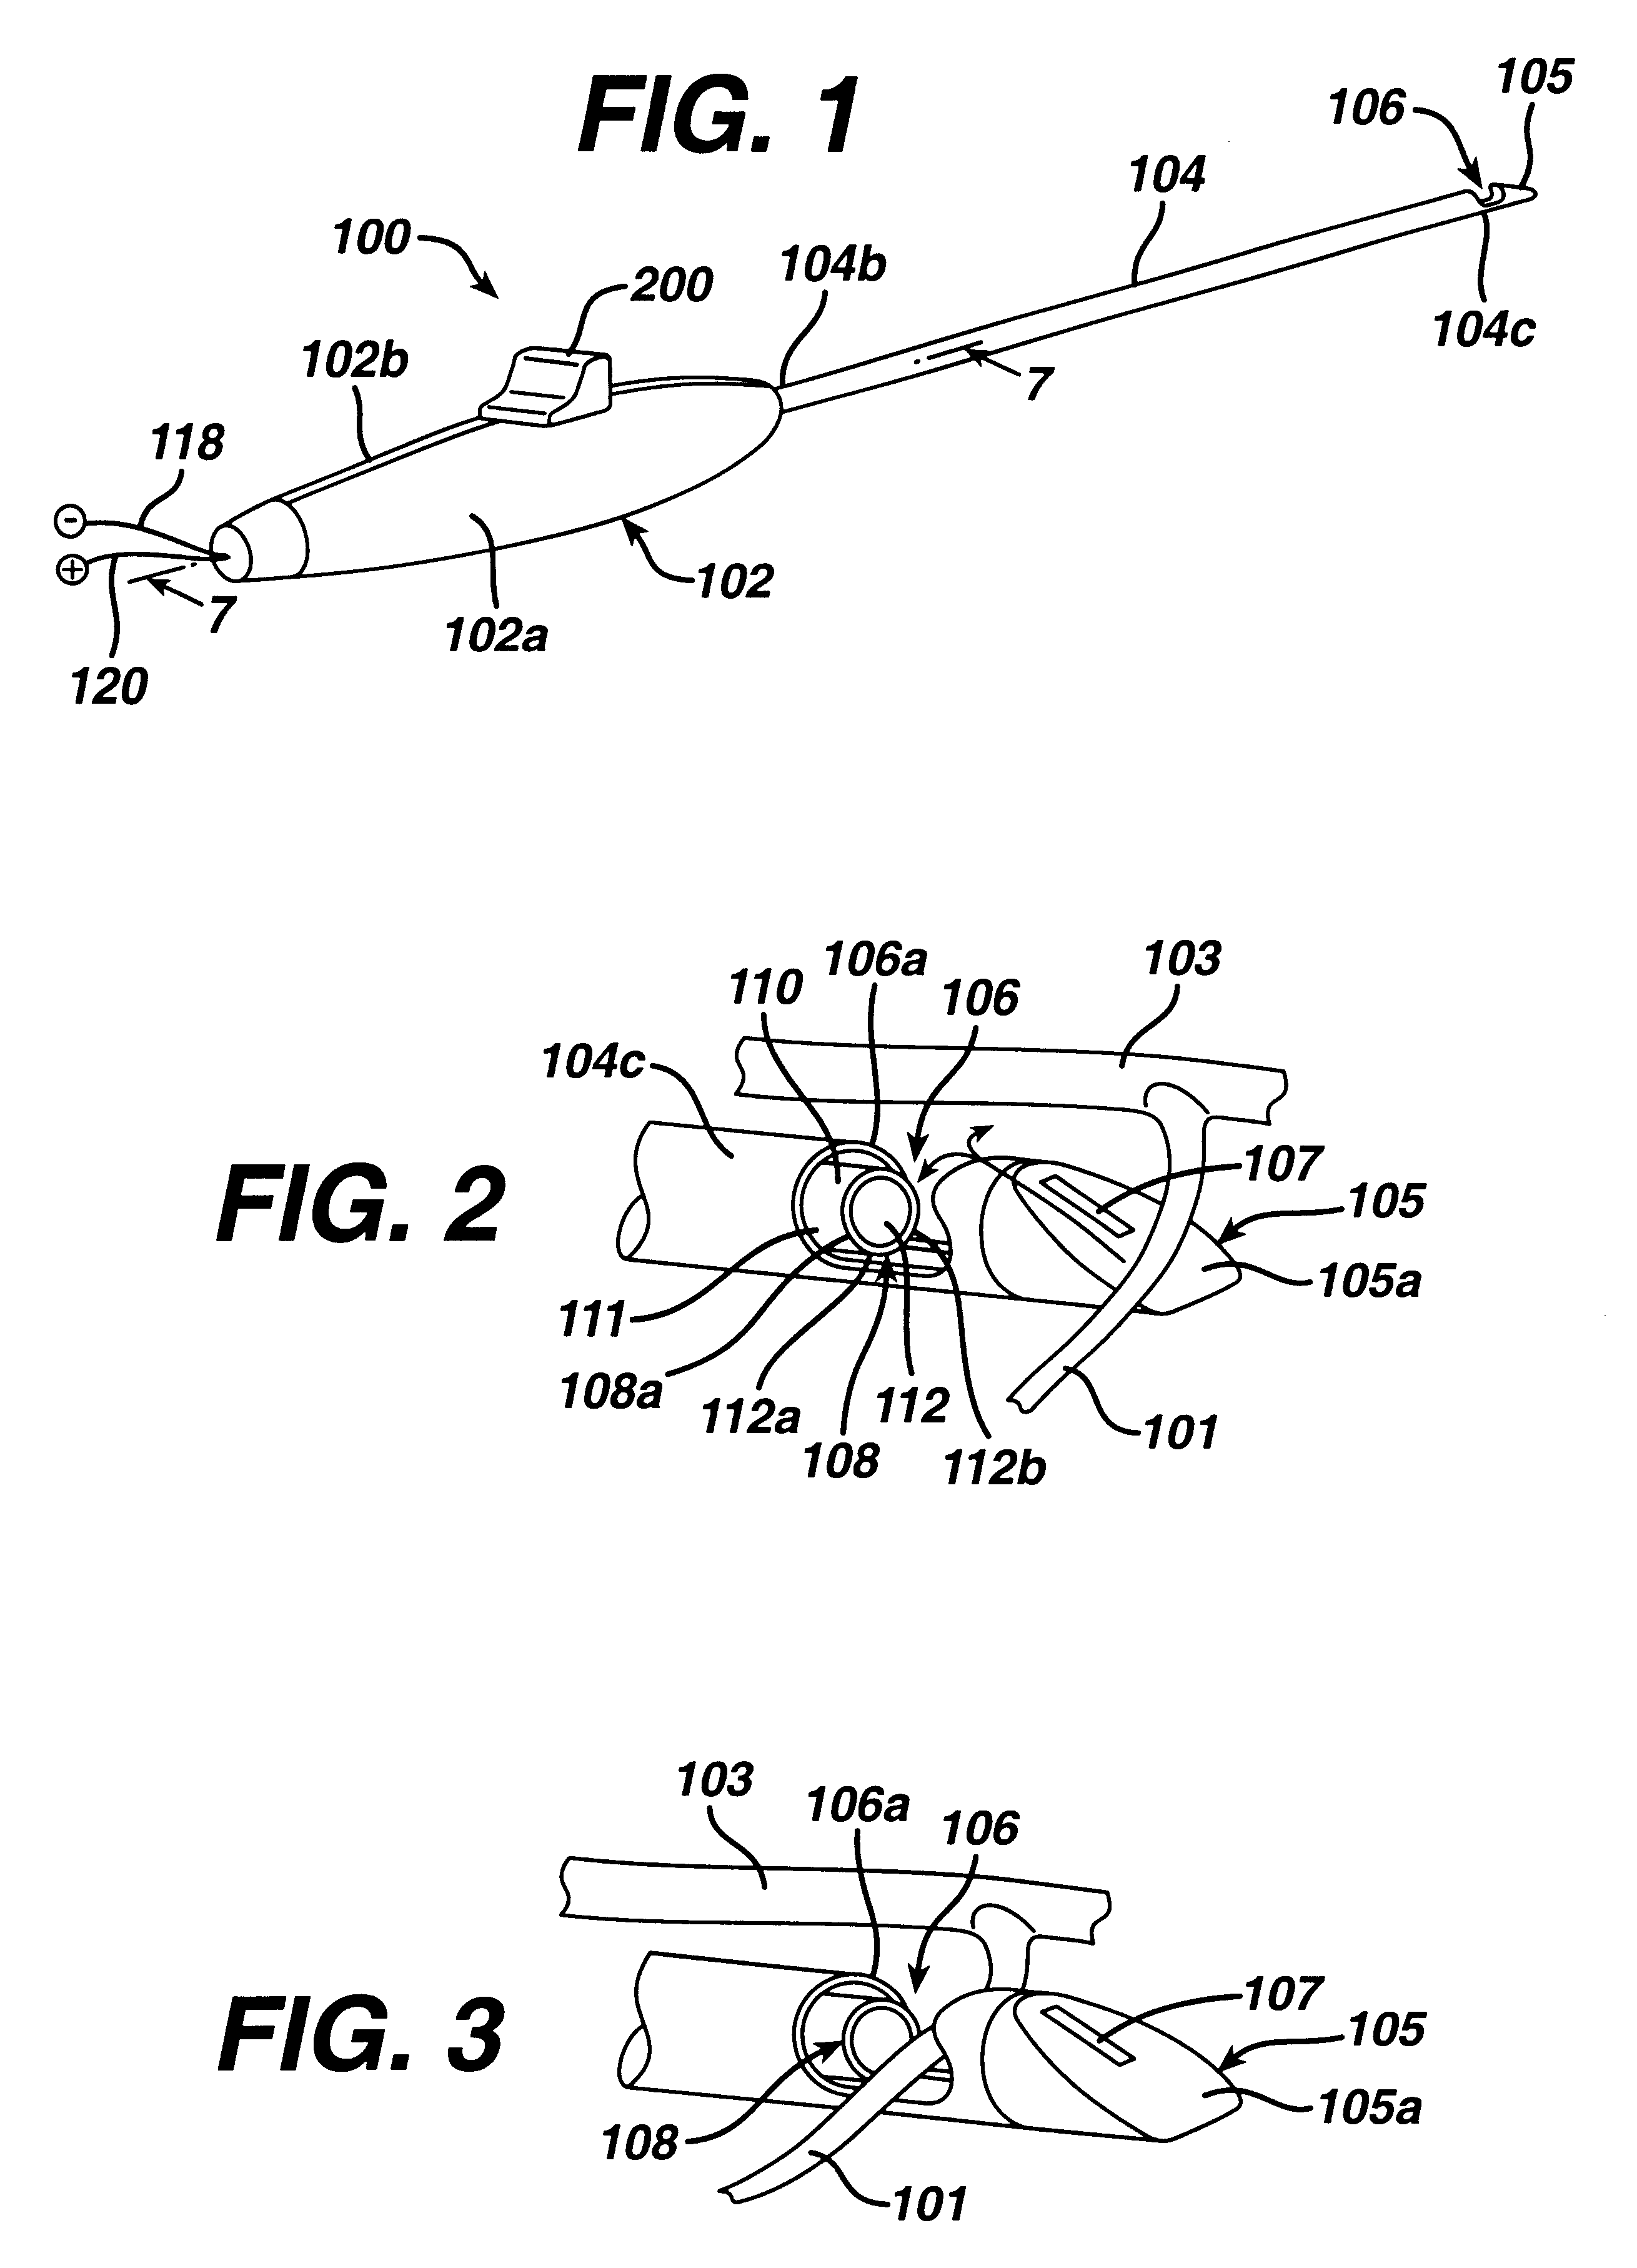 Surgical device for clamping, ligating, and severing tissue